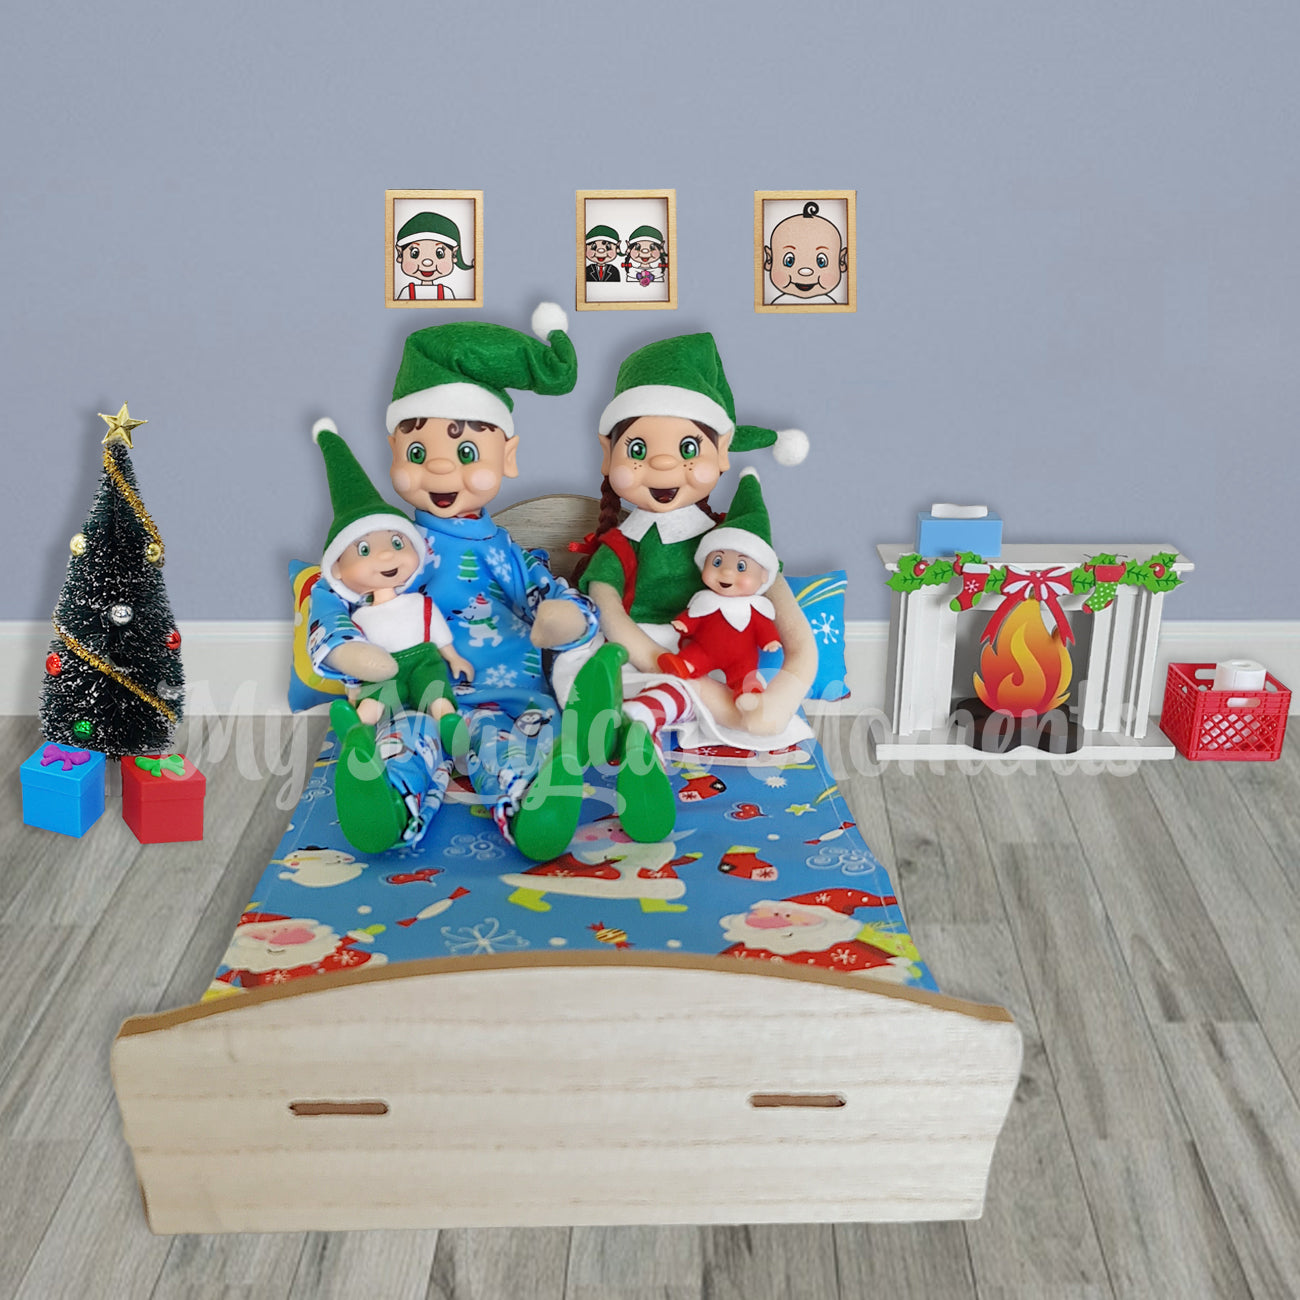 Elf family in bed with fireplace and Christmas tree